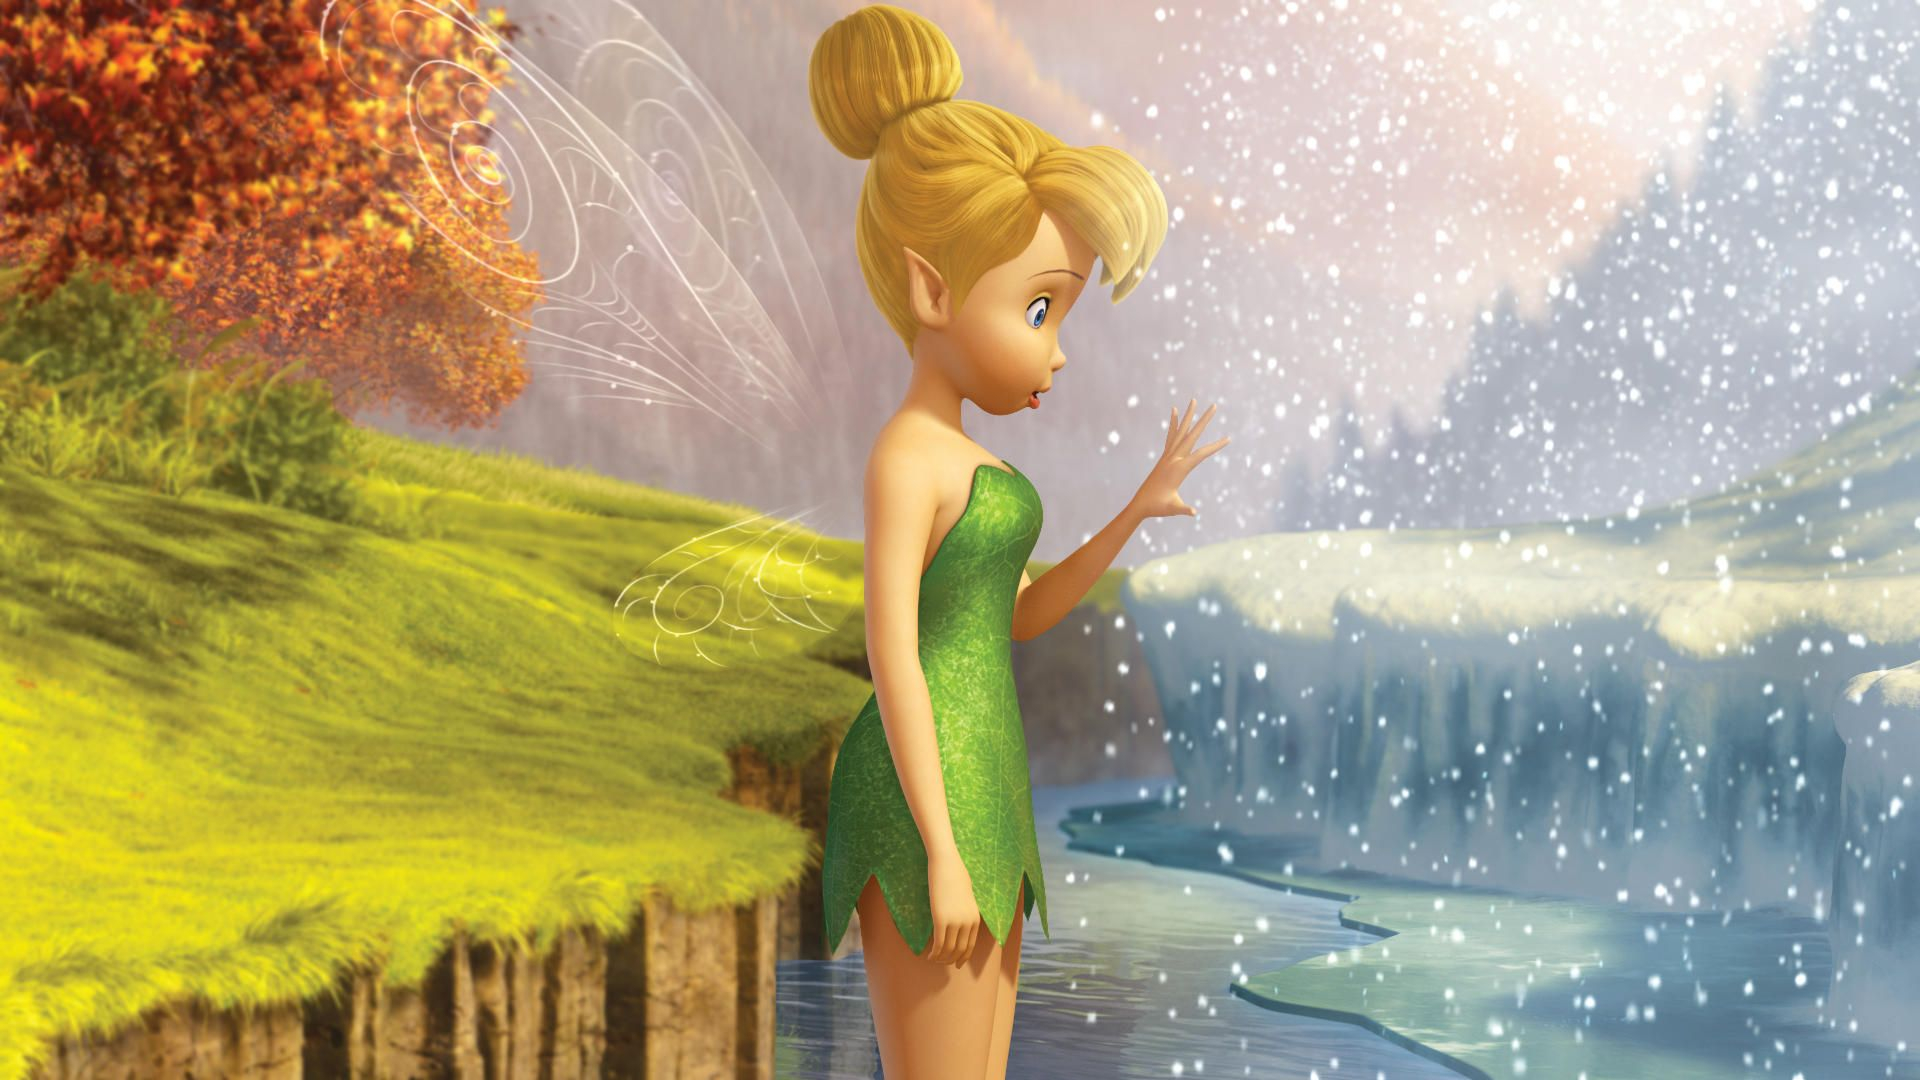 1920x1080 Tinkerbell \u0026 the Mysterious Winter Woods Wallpaper: TinkerBell Secret Of The Wings | Tinkerbell pictures, Secret of the wings, Tinkerbell wallpaper